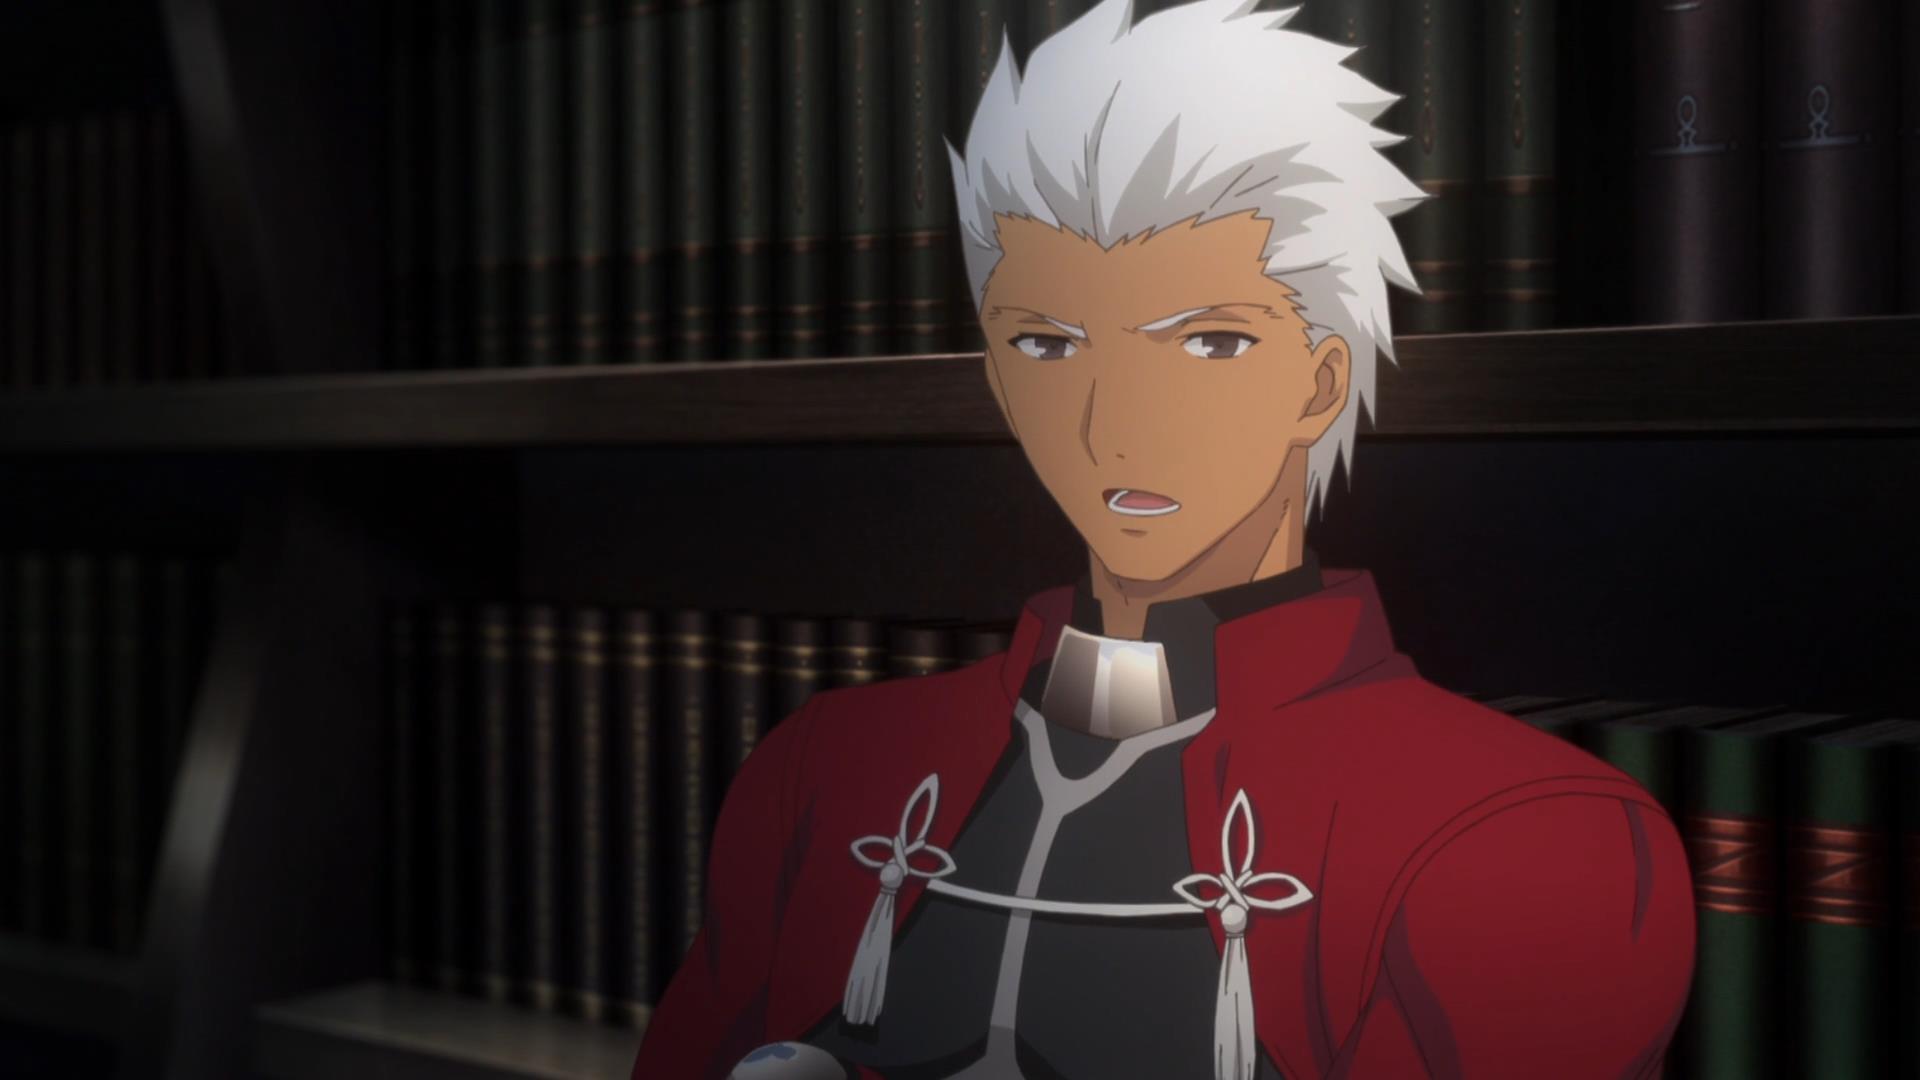 Fate/stay night – Unlimited Blade Works Ep. 8: Rider gets ridden